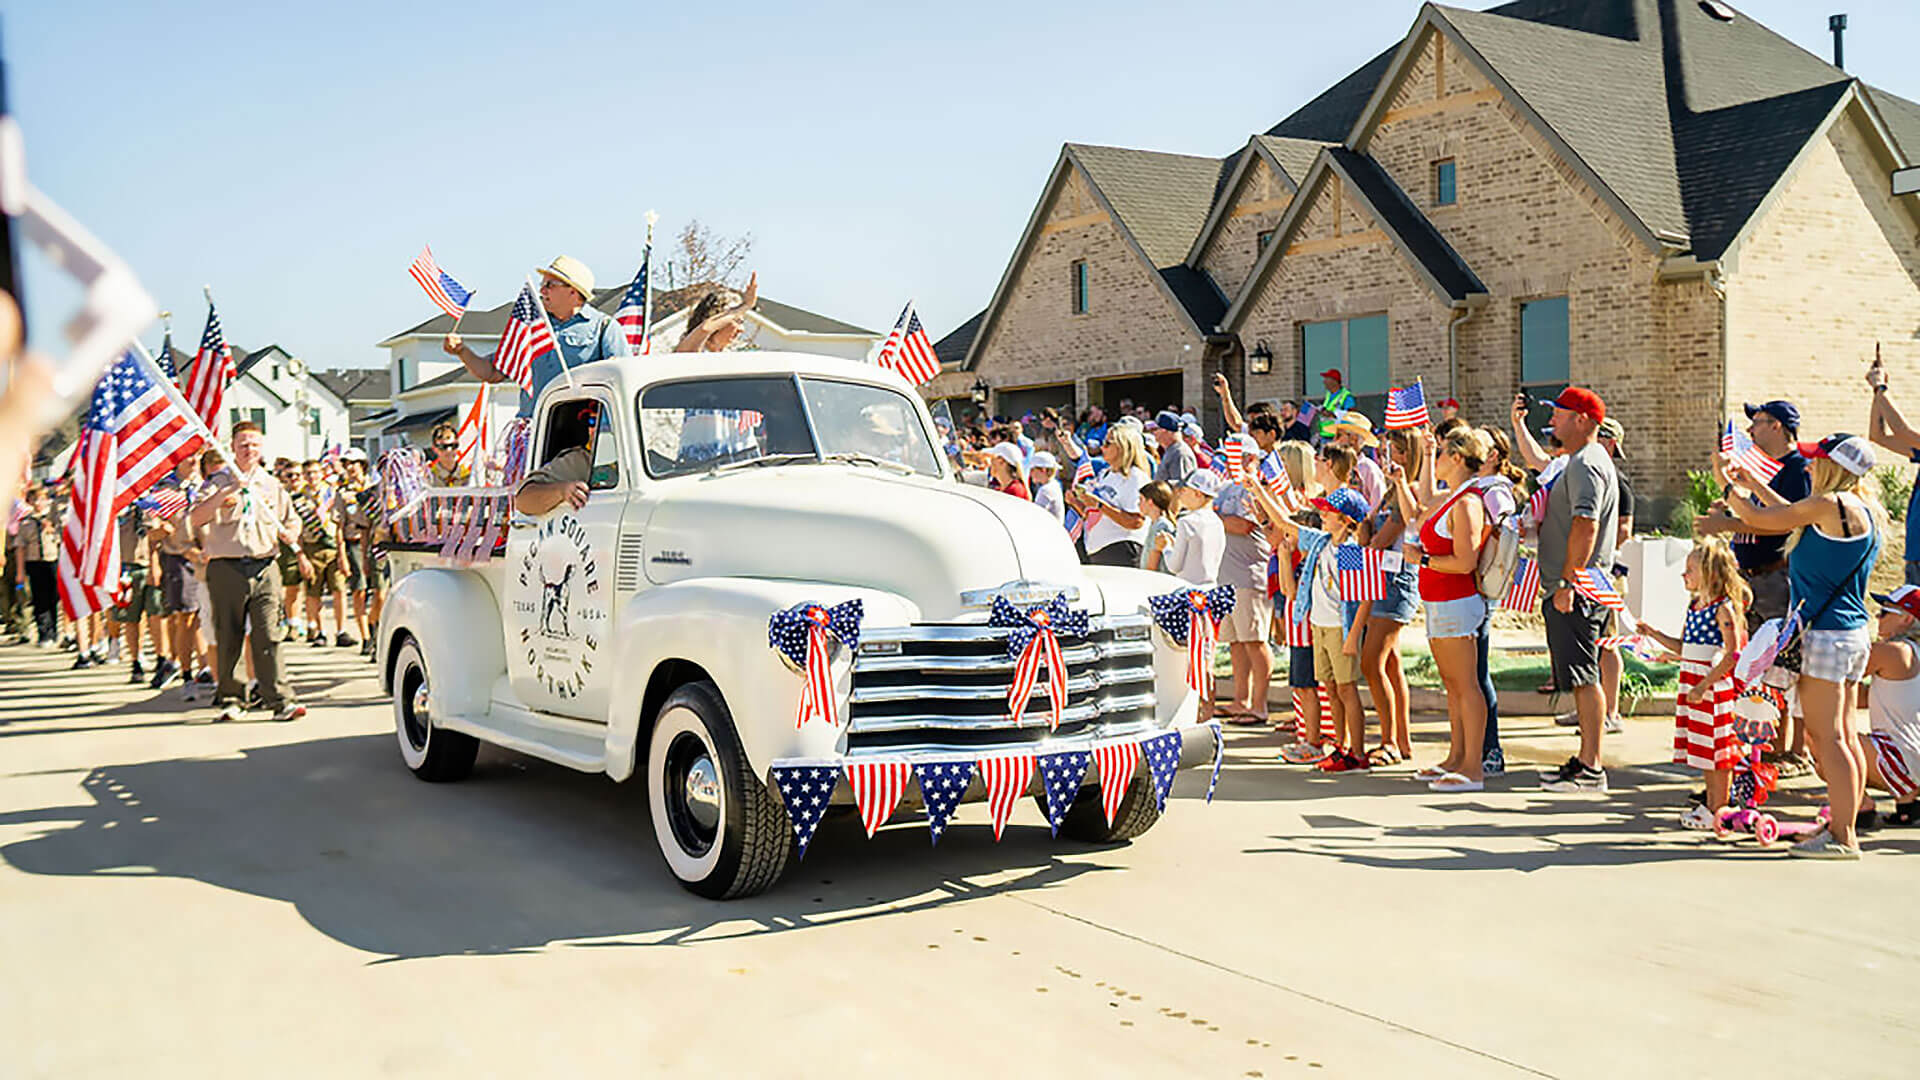 An American flag-covered truck is seen in a parade at Hillwood’s Pecan Square development in Northlake, Texas.